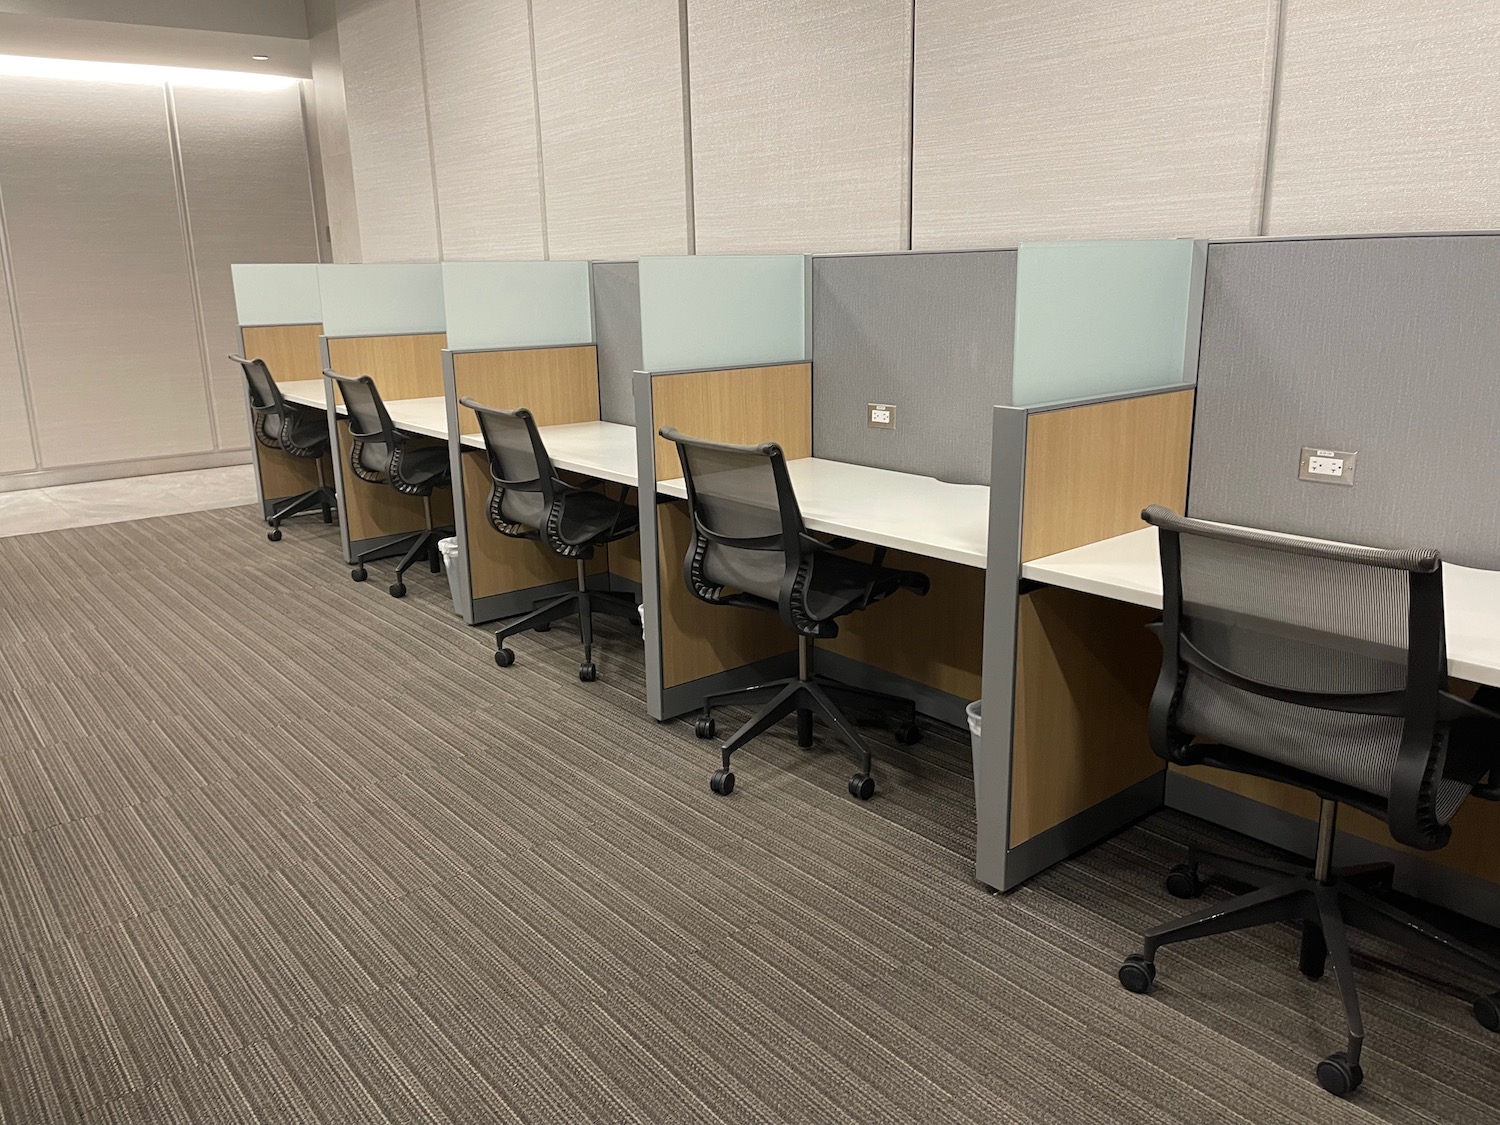 a row of cubicles with chairs and desks